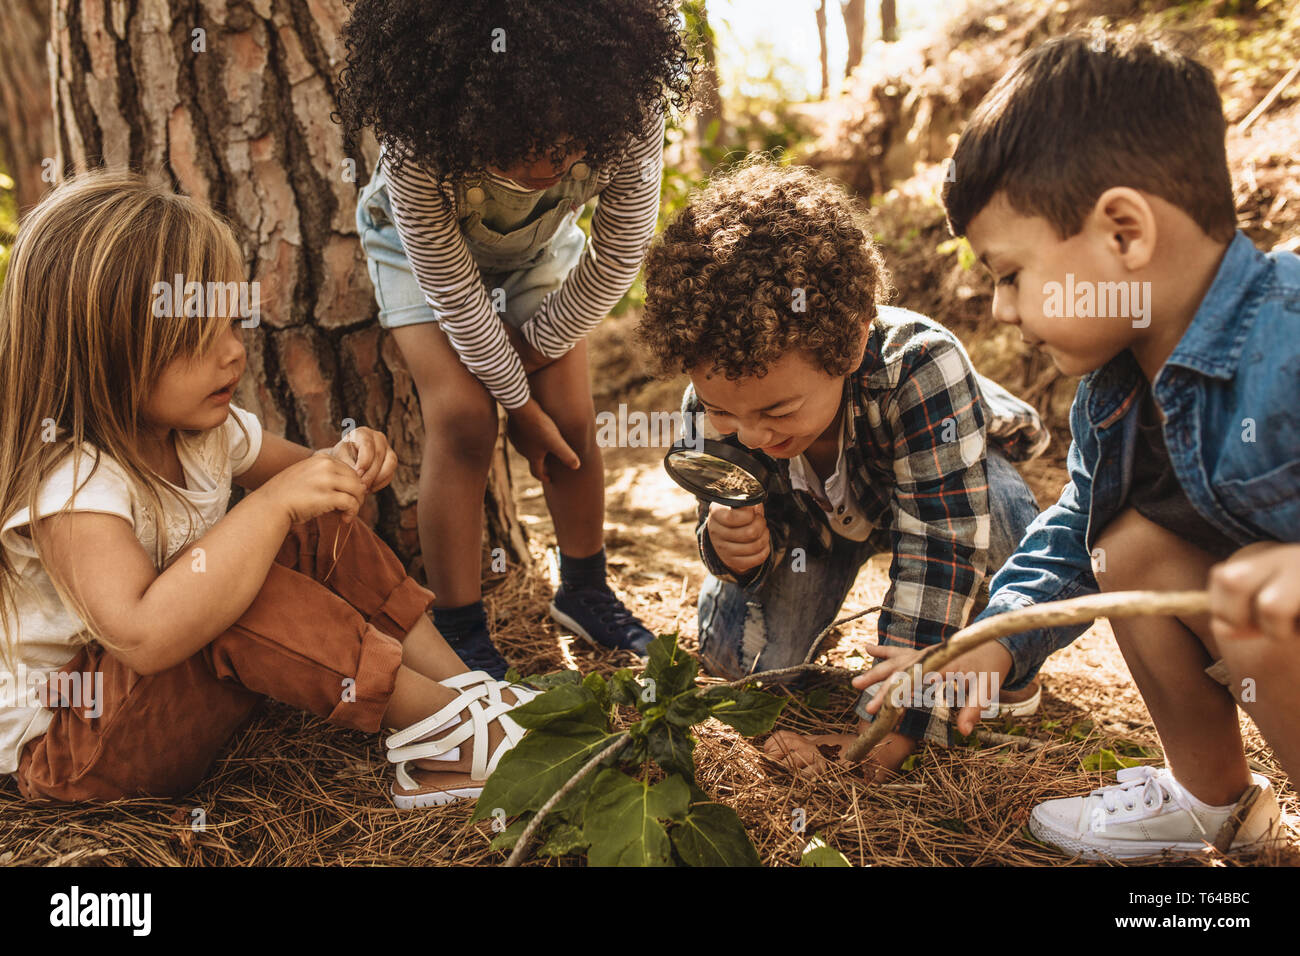 Children in forest looking at leaves as a researcher together with the magnifying glass. Stock Photo